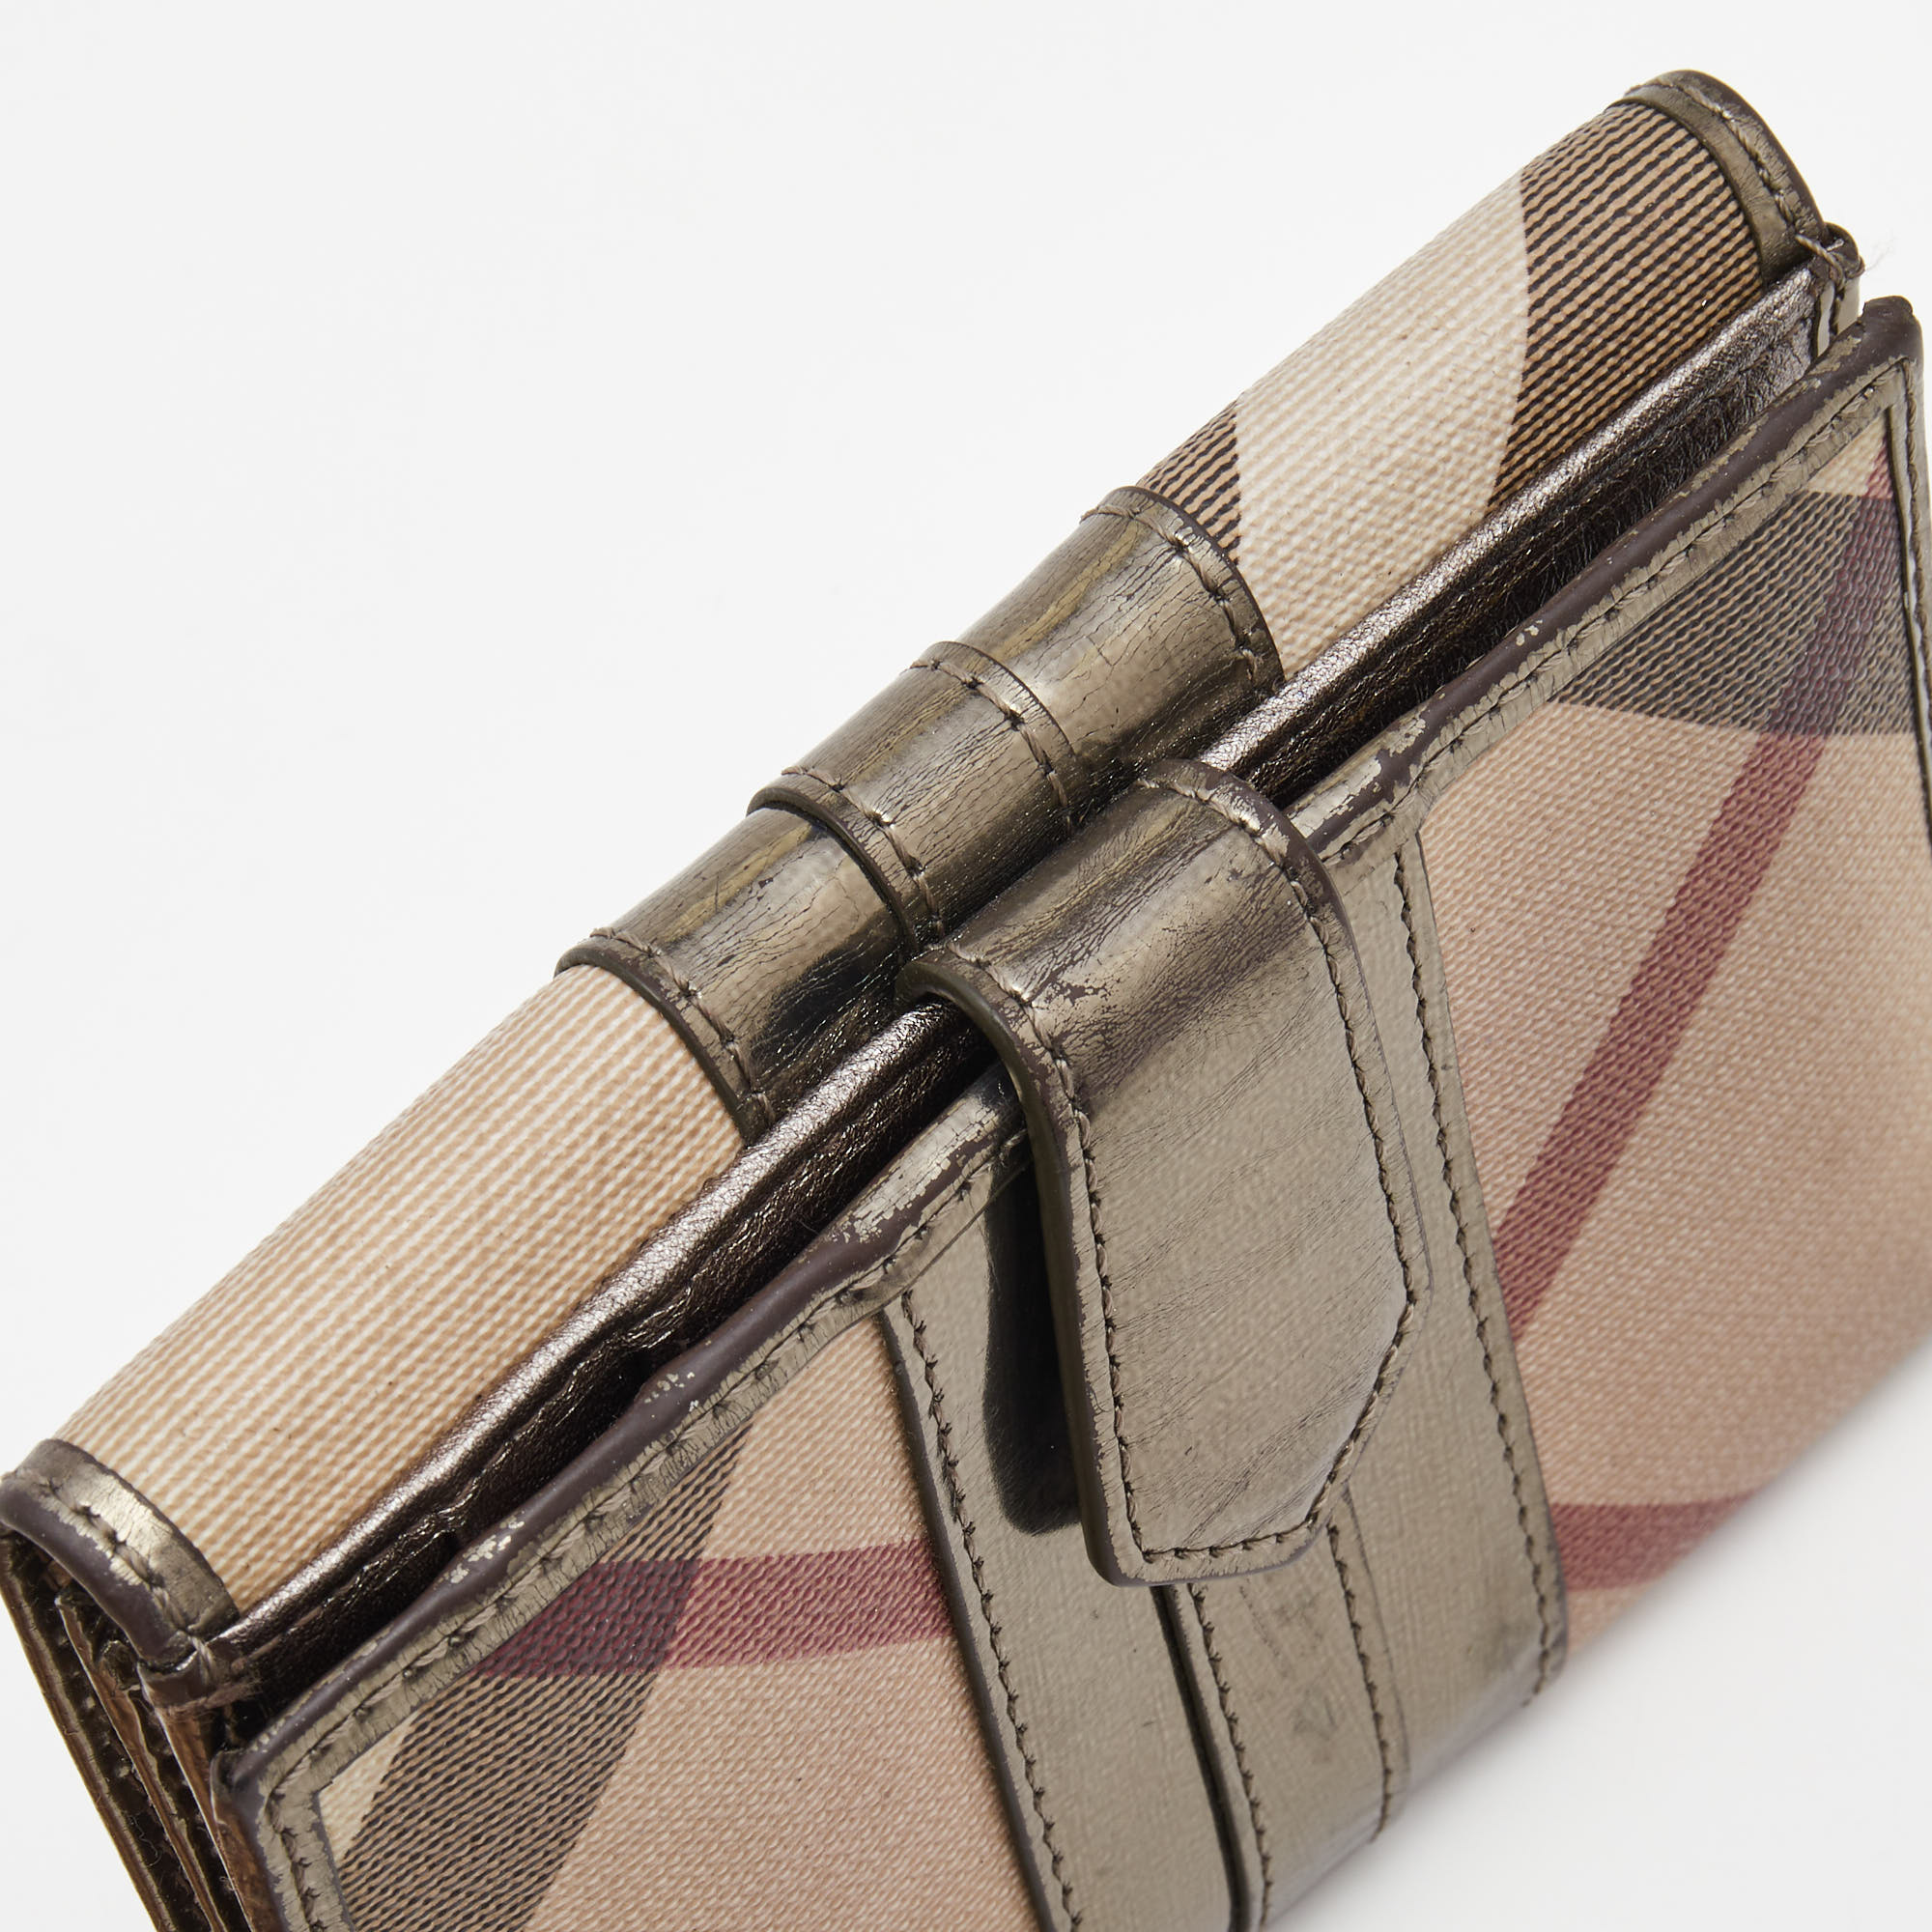 Burberry Metallic/Beige Nova Check PVC And Patent Leather French Wallet